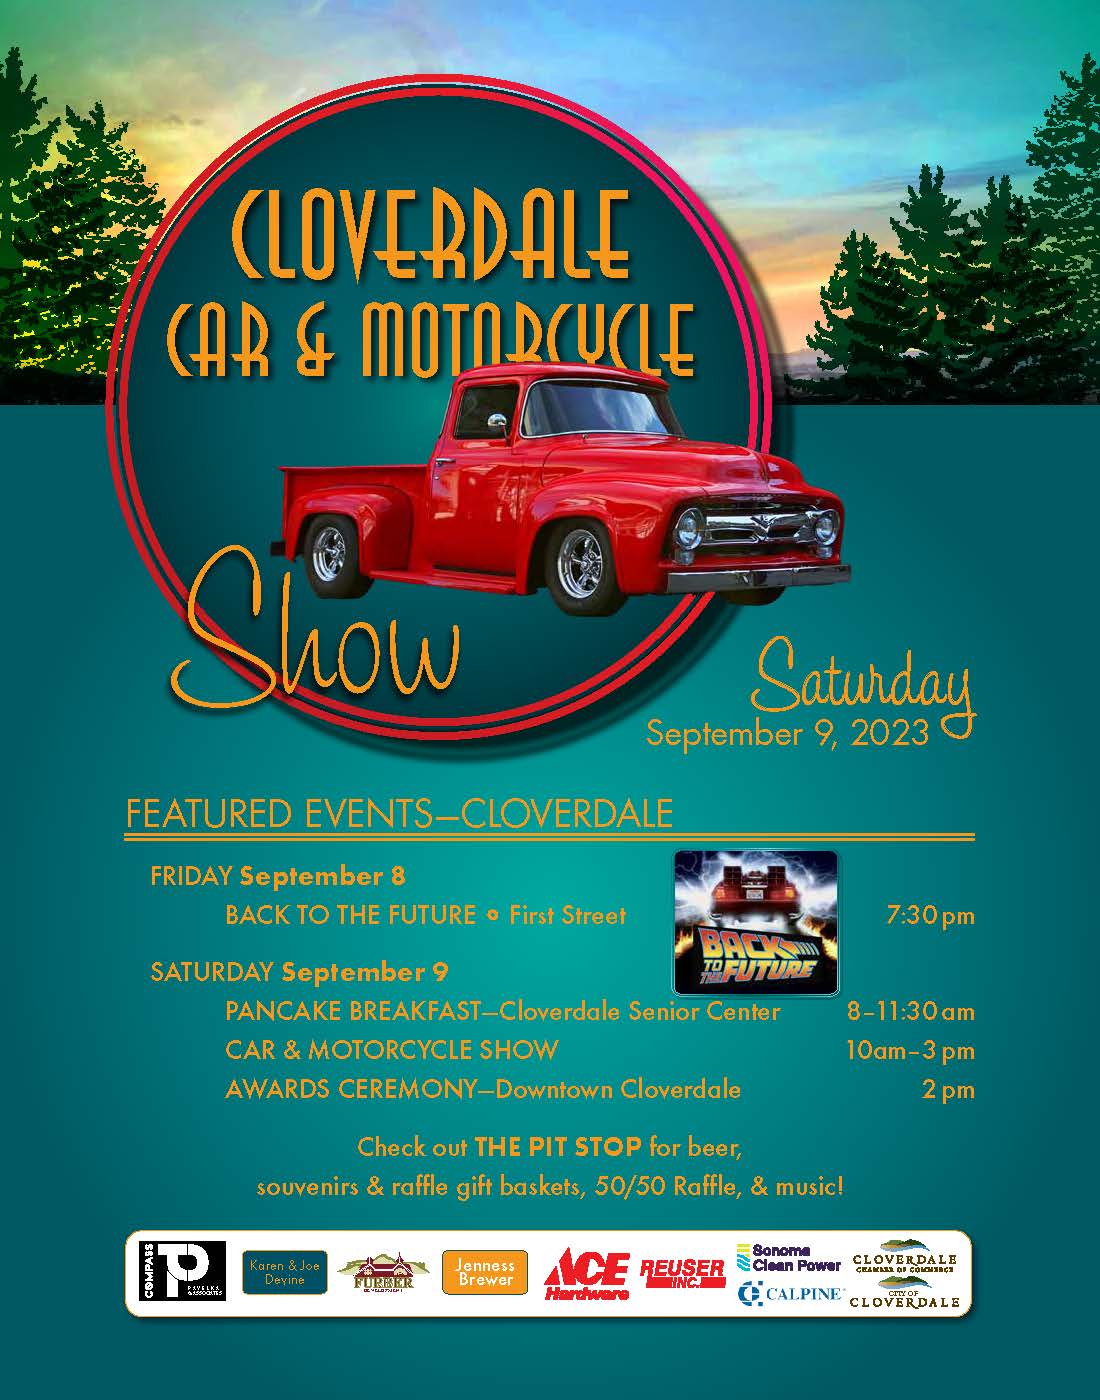 Poster for Cloverdale Car & Motorcycle show